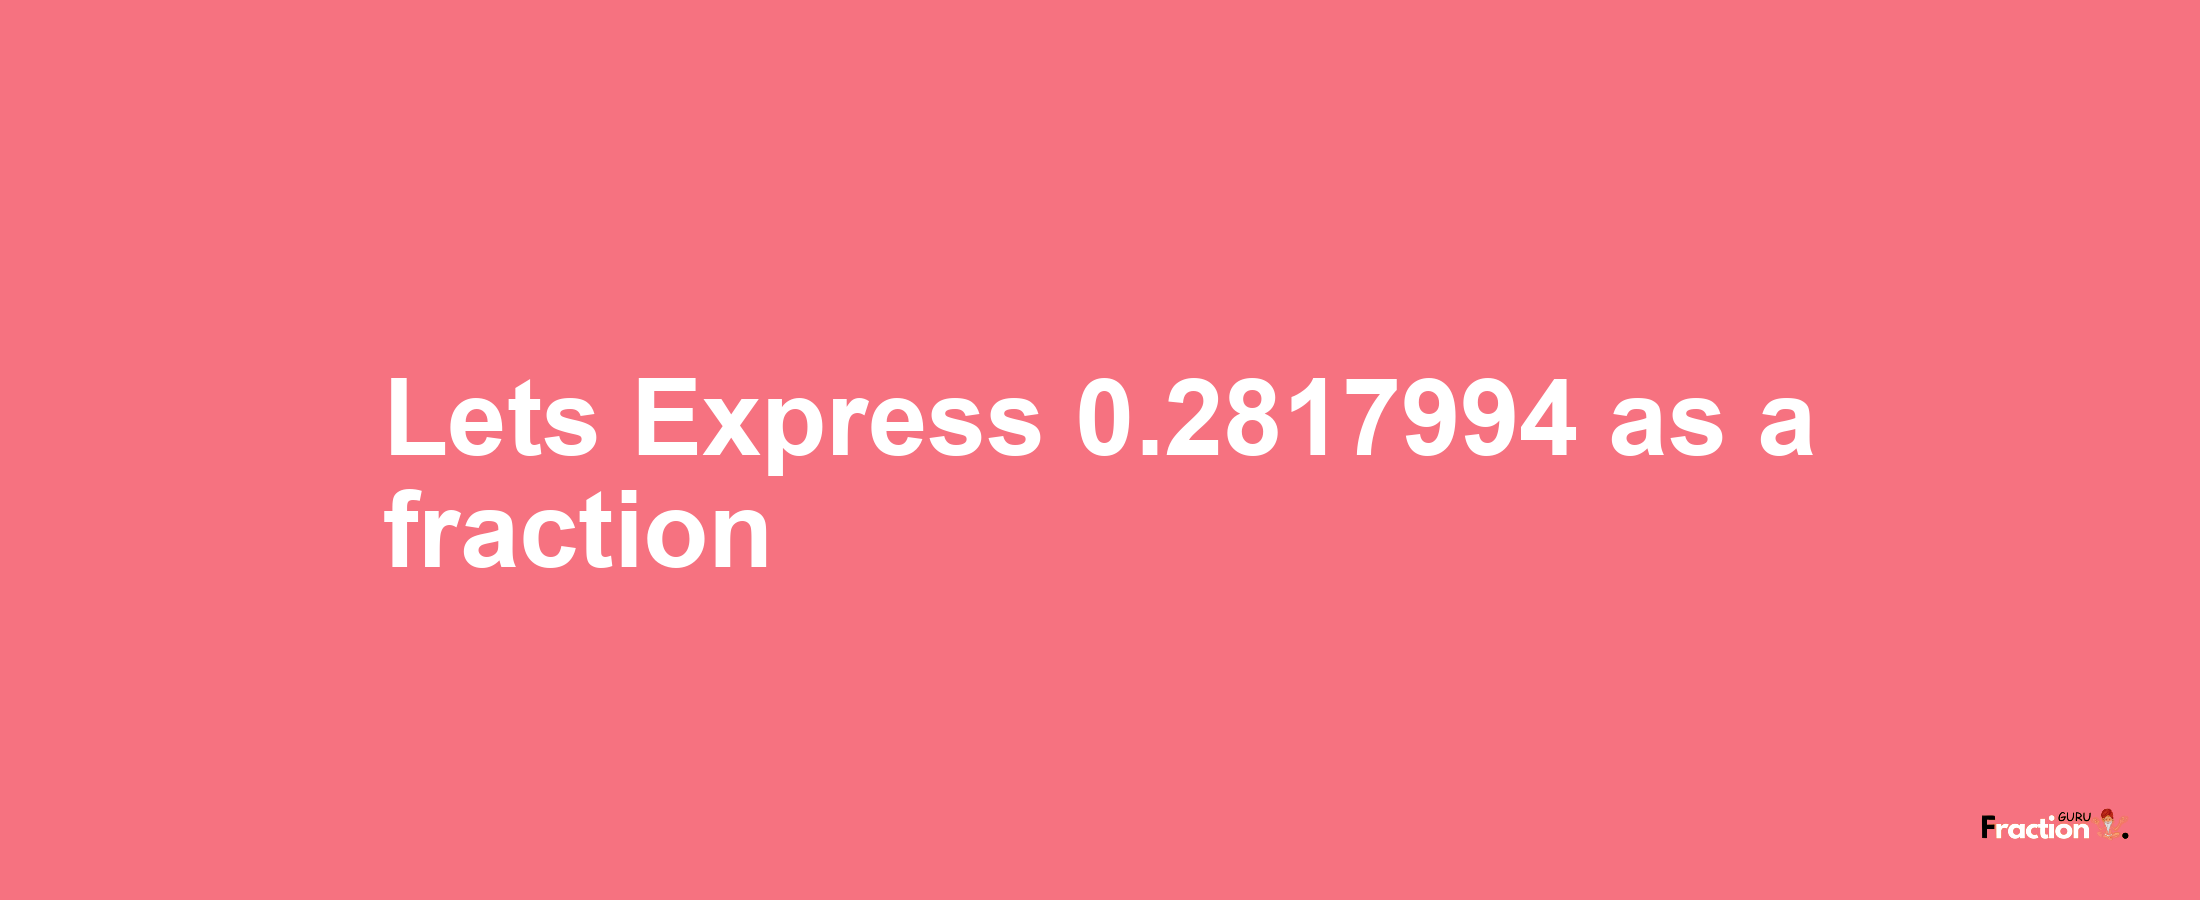 Lets Express 0.2817994 as afraction